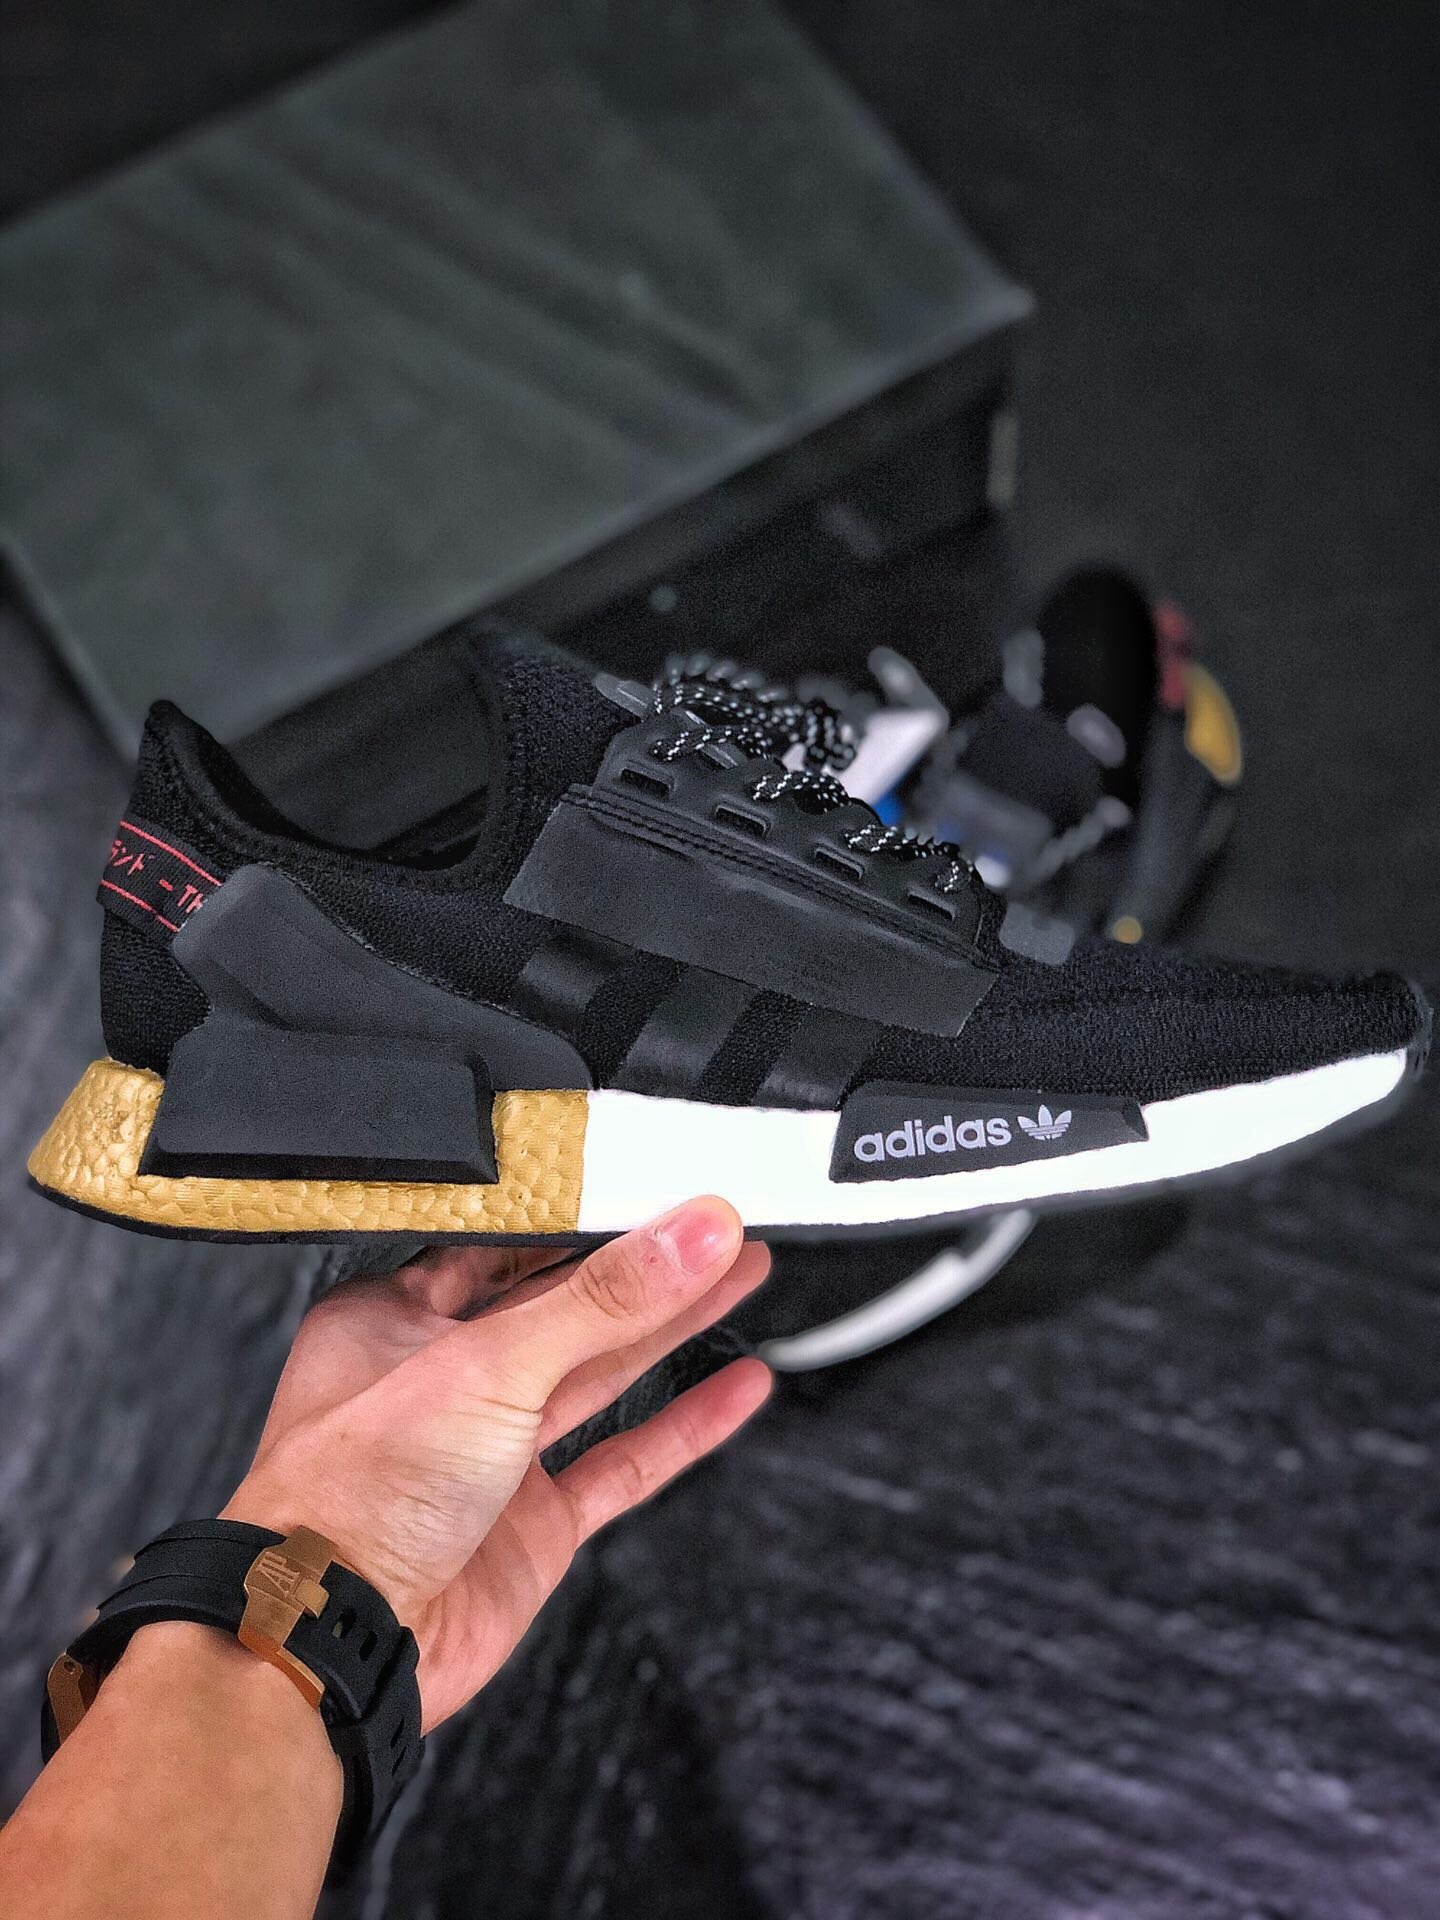 nmd running shoes